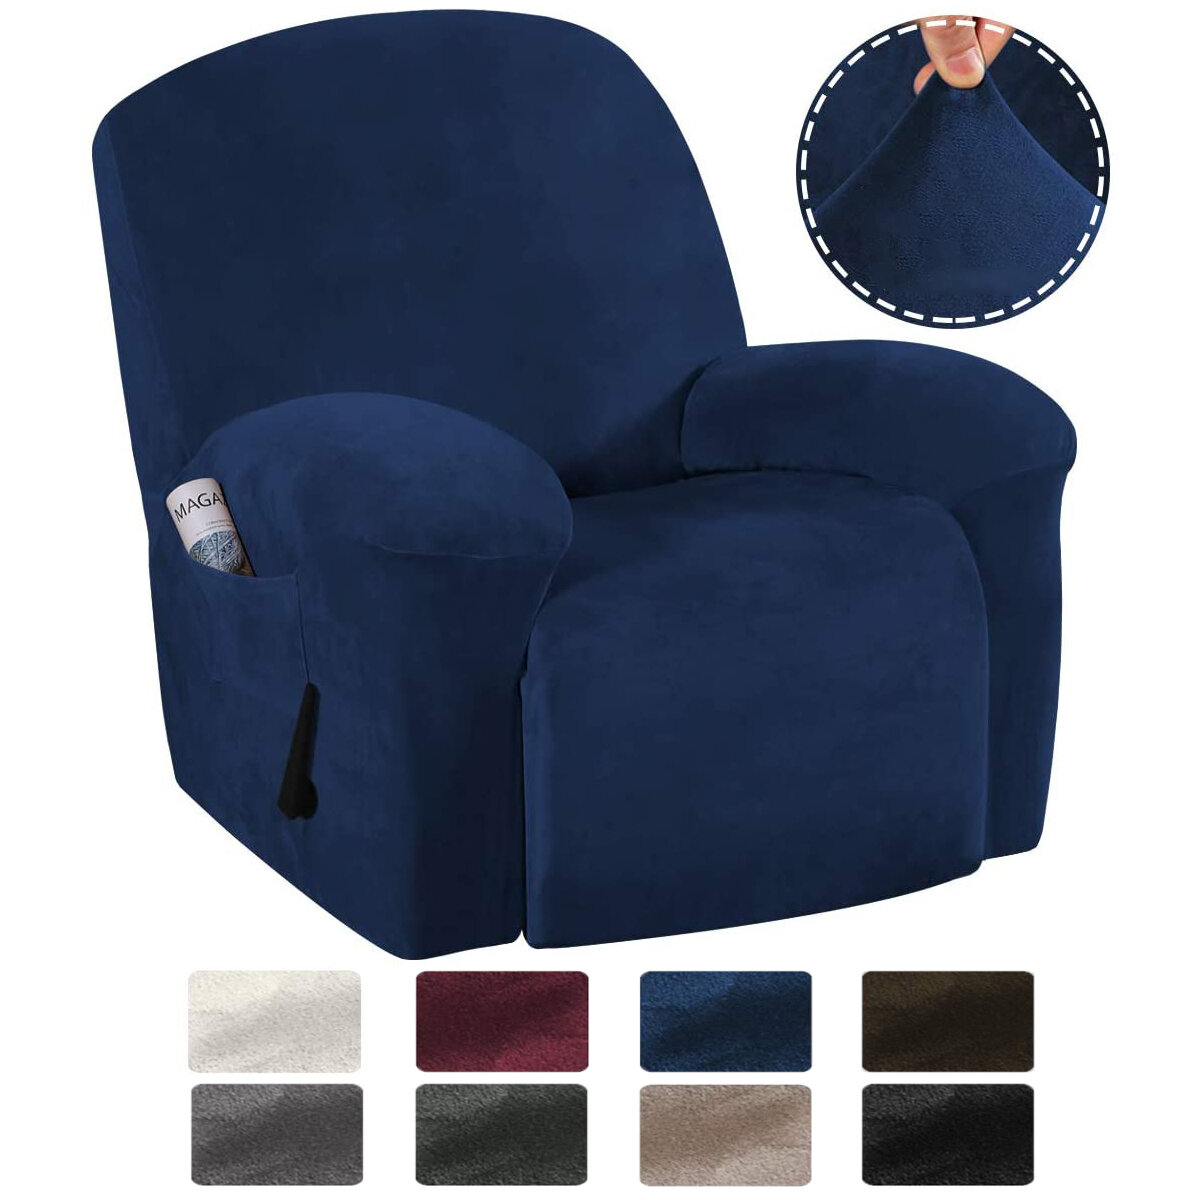 Image of 9 Colors Stretch Recliner Chair Covers Washable Fabric Non-slip Sofa Slipcovers Waterproof Seat Cover with Pocket